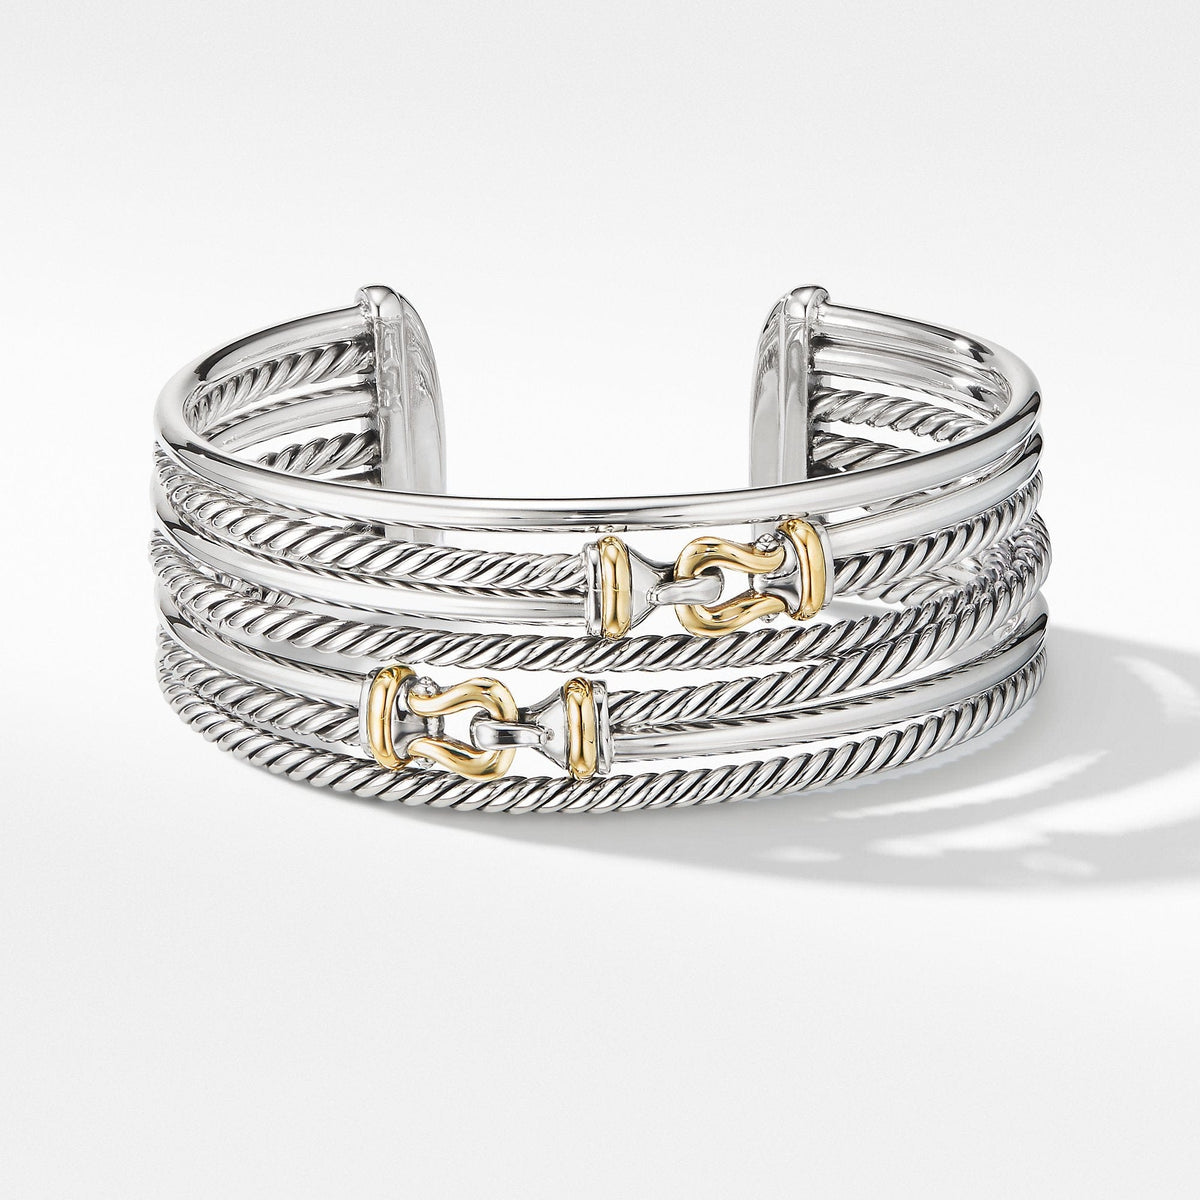 Buckle Crossover Cuff Bracelet with 18K Yellow Gold